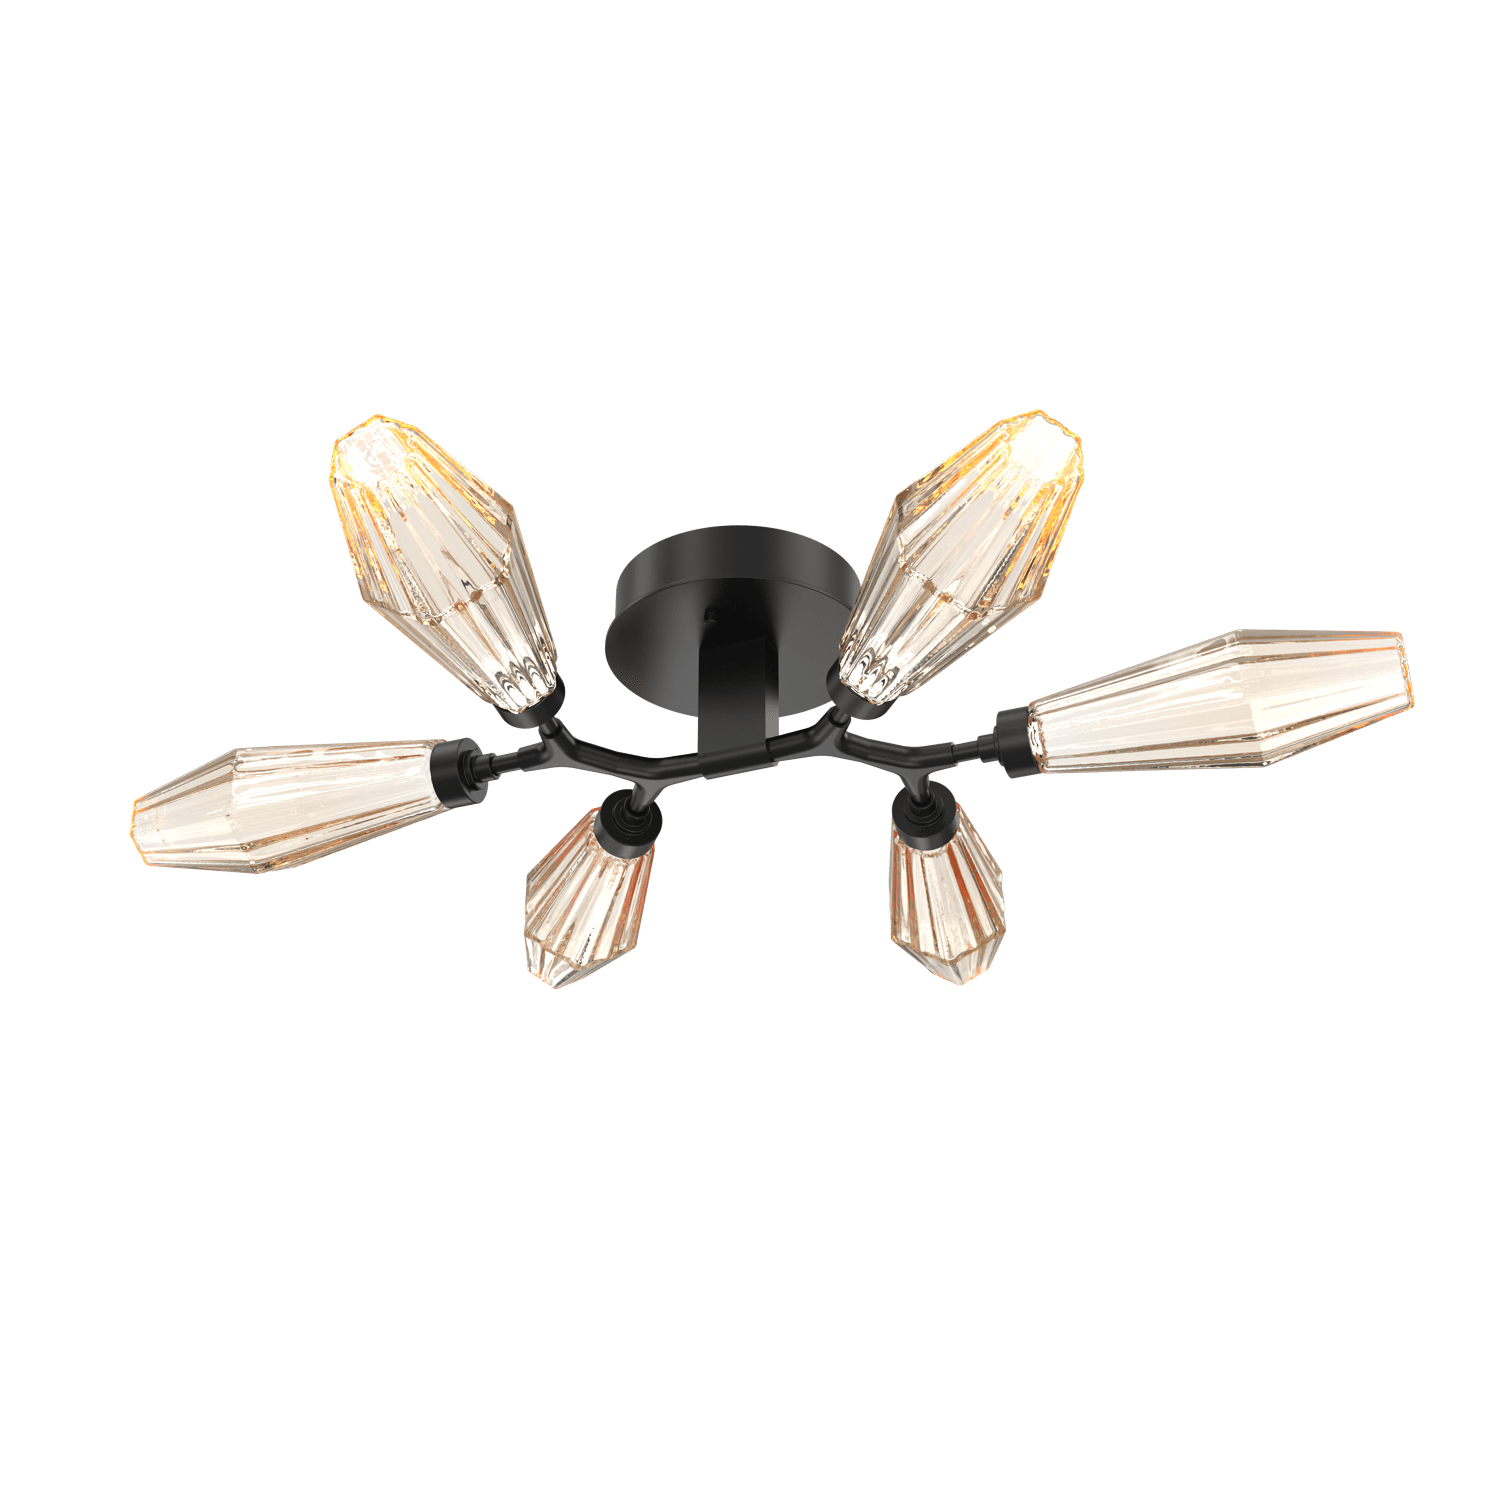 CLB0049-01-MB-RA-Hammerton-Studio-Aalto-6-light-organic-flush-mount-light-with-matte-black-finish-and-optic-ribbed-amber-glass-shades-and-LED-lamping